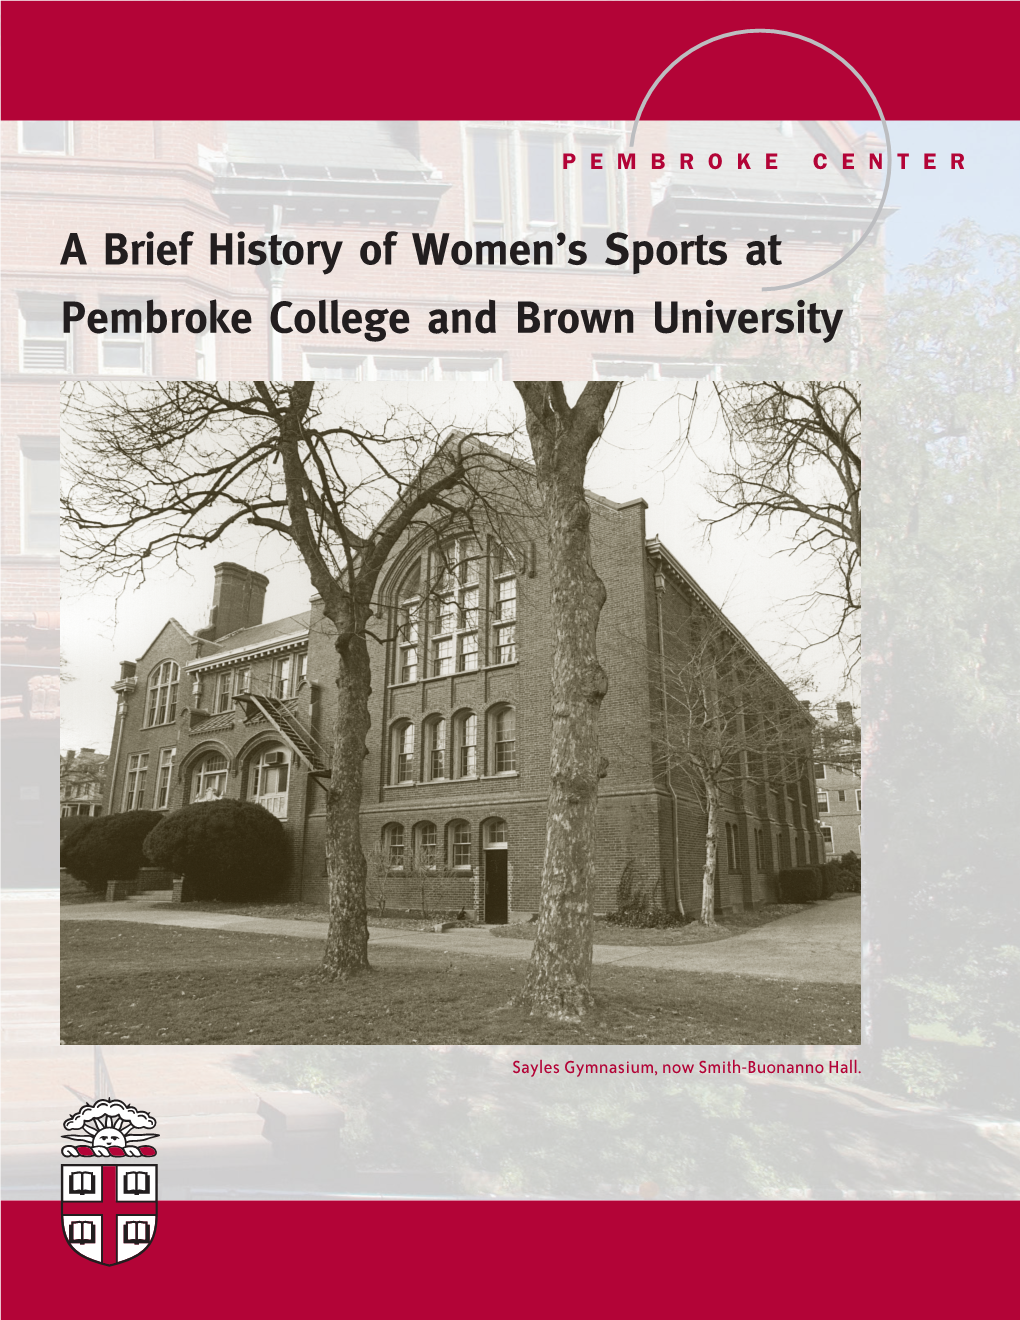 A Brief History of Women's Sports at Pembroke College and Brown